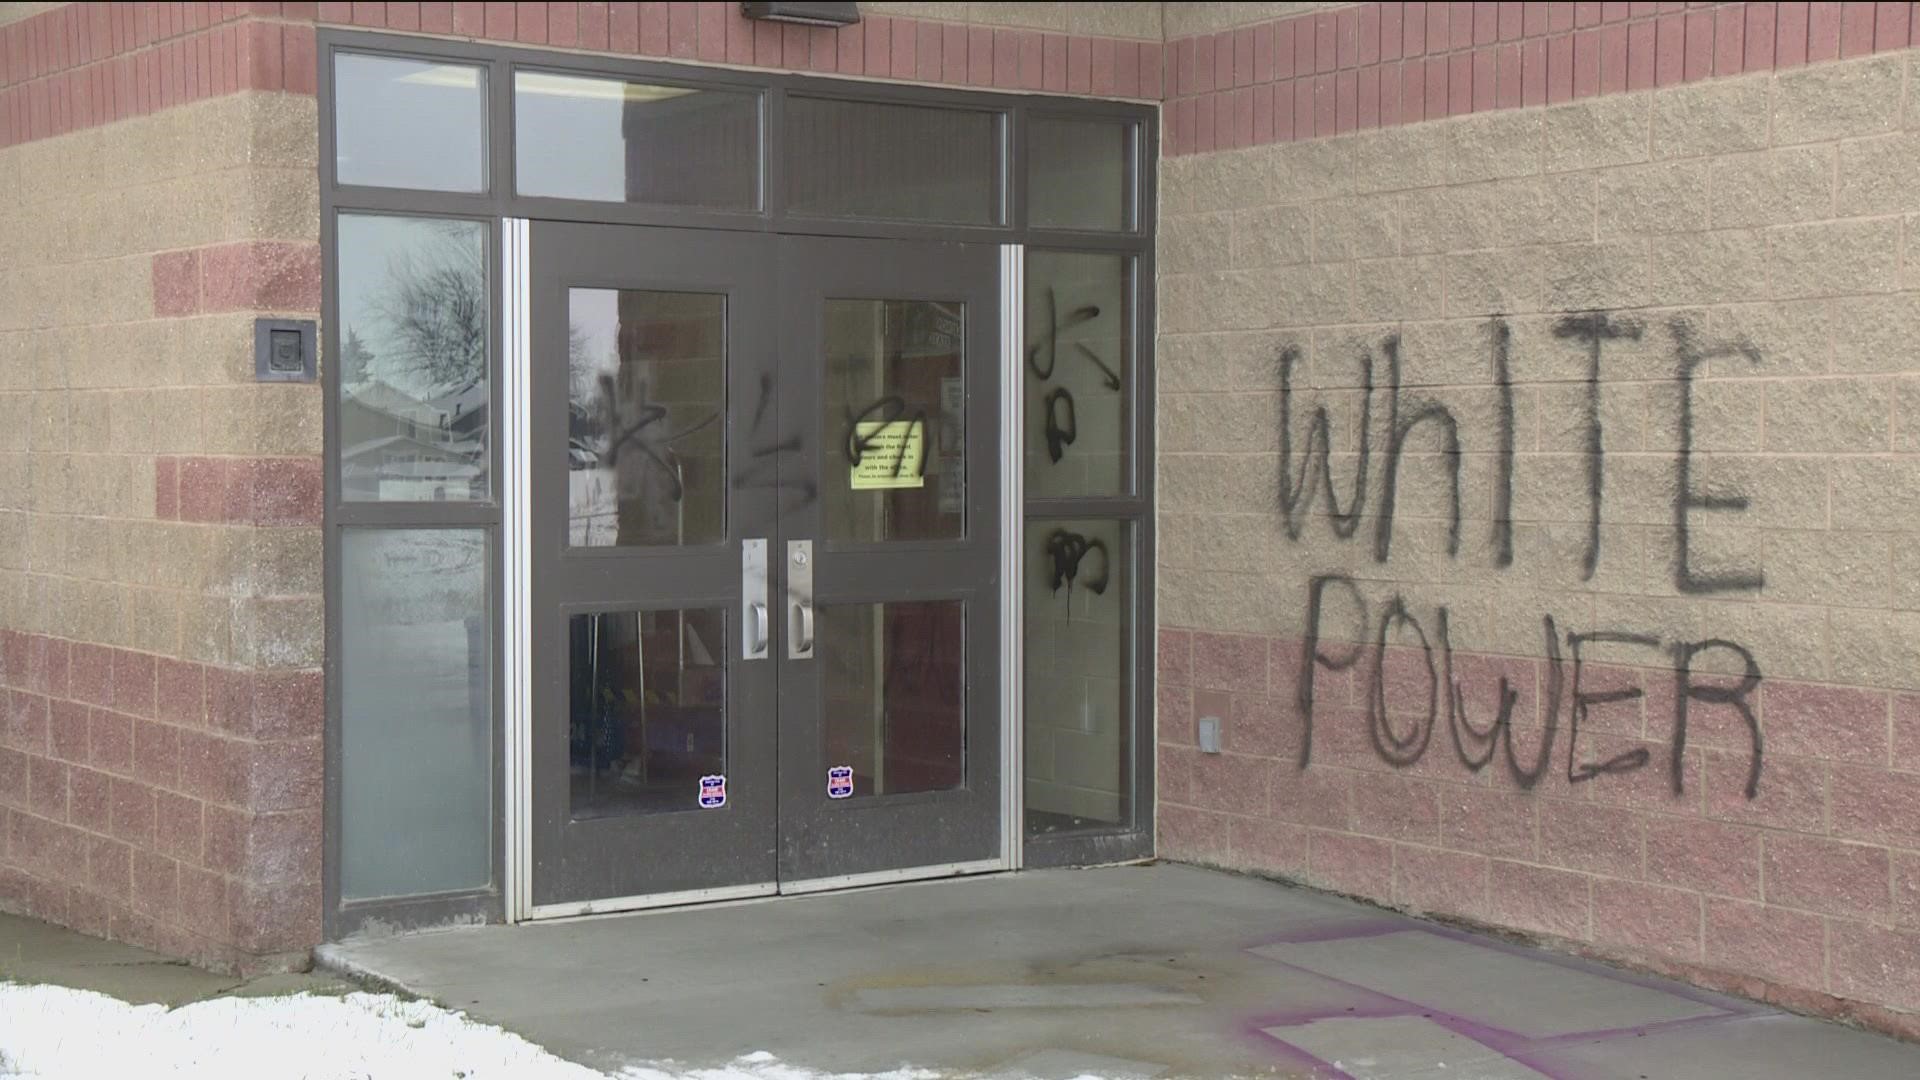 Following a student protest, the high school was graffitied with hateful terms by four hooded individuals.